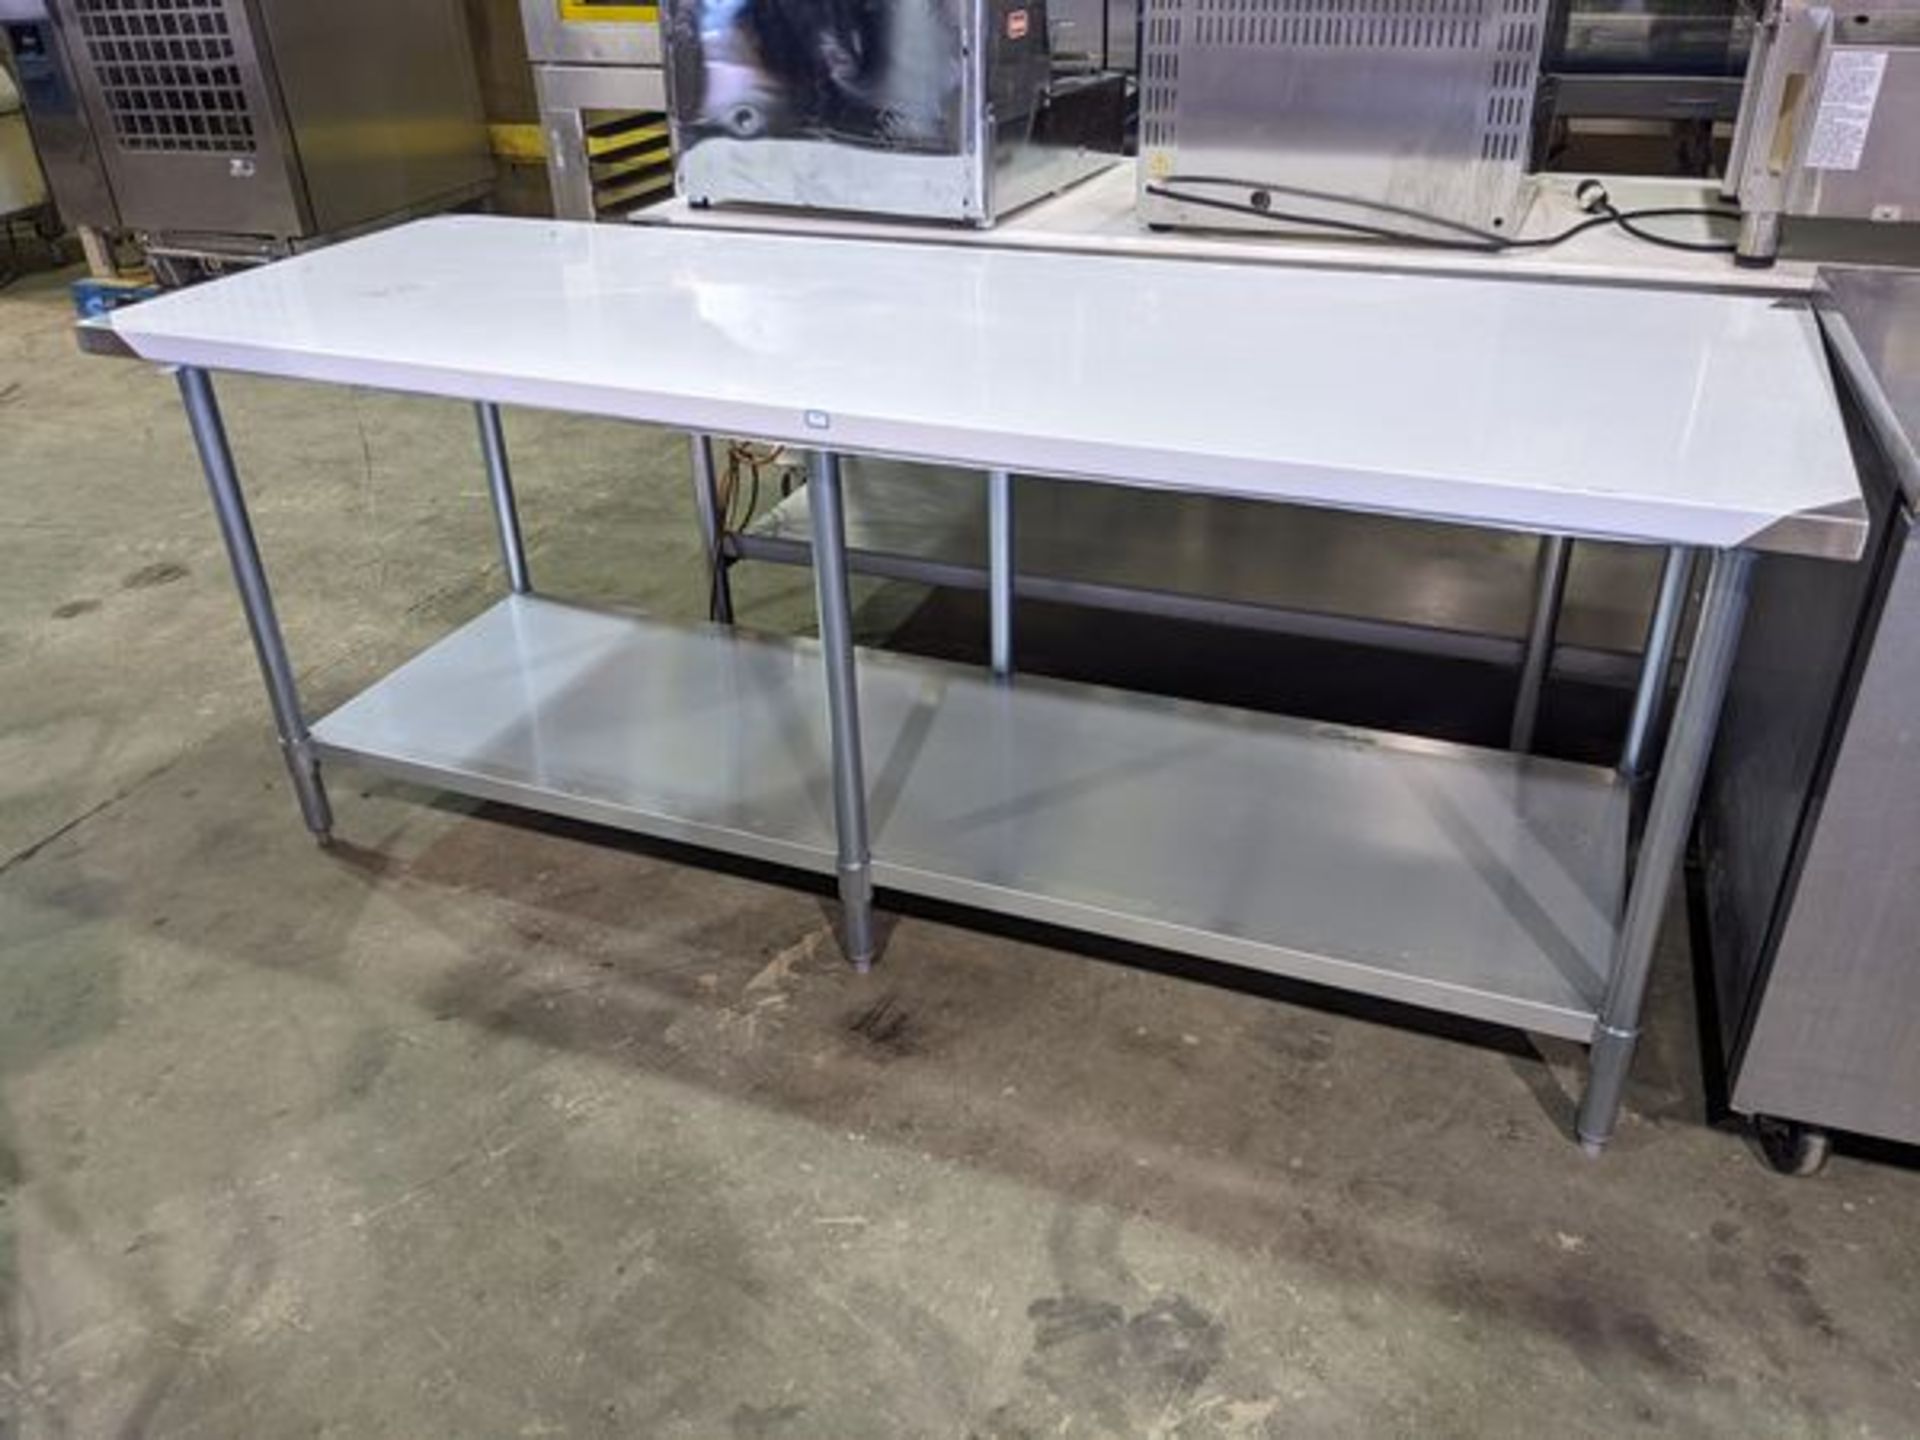 New 30 x 84" Stainless Steel 2 Tier Table